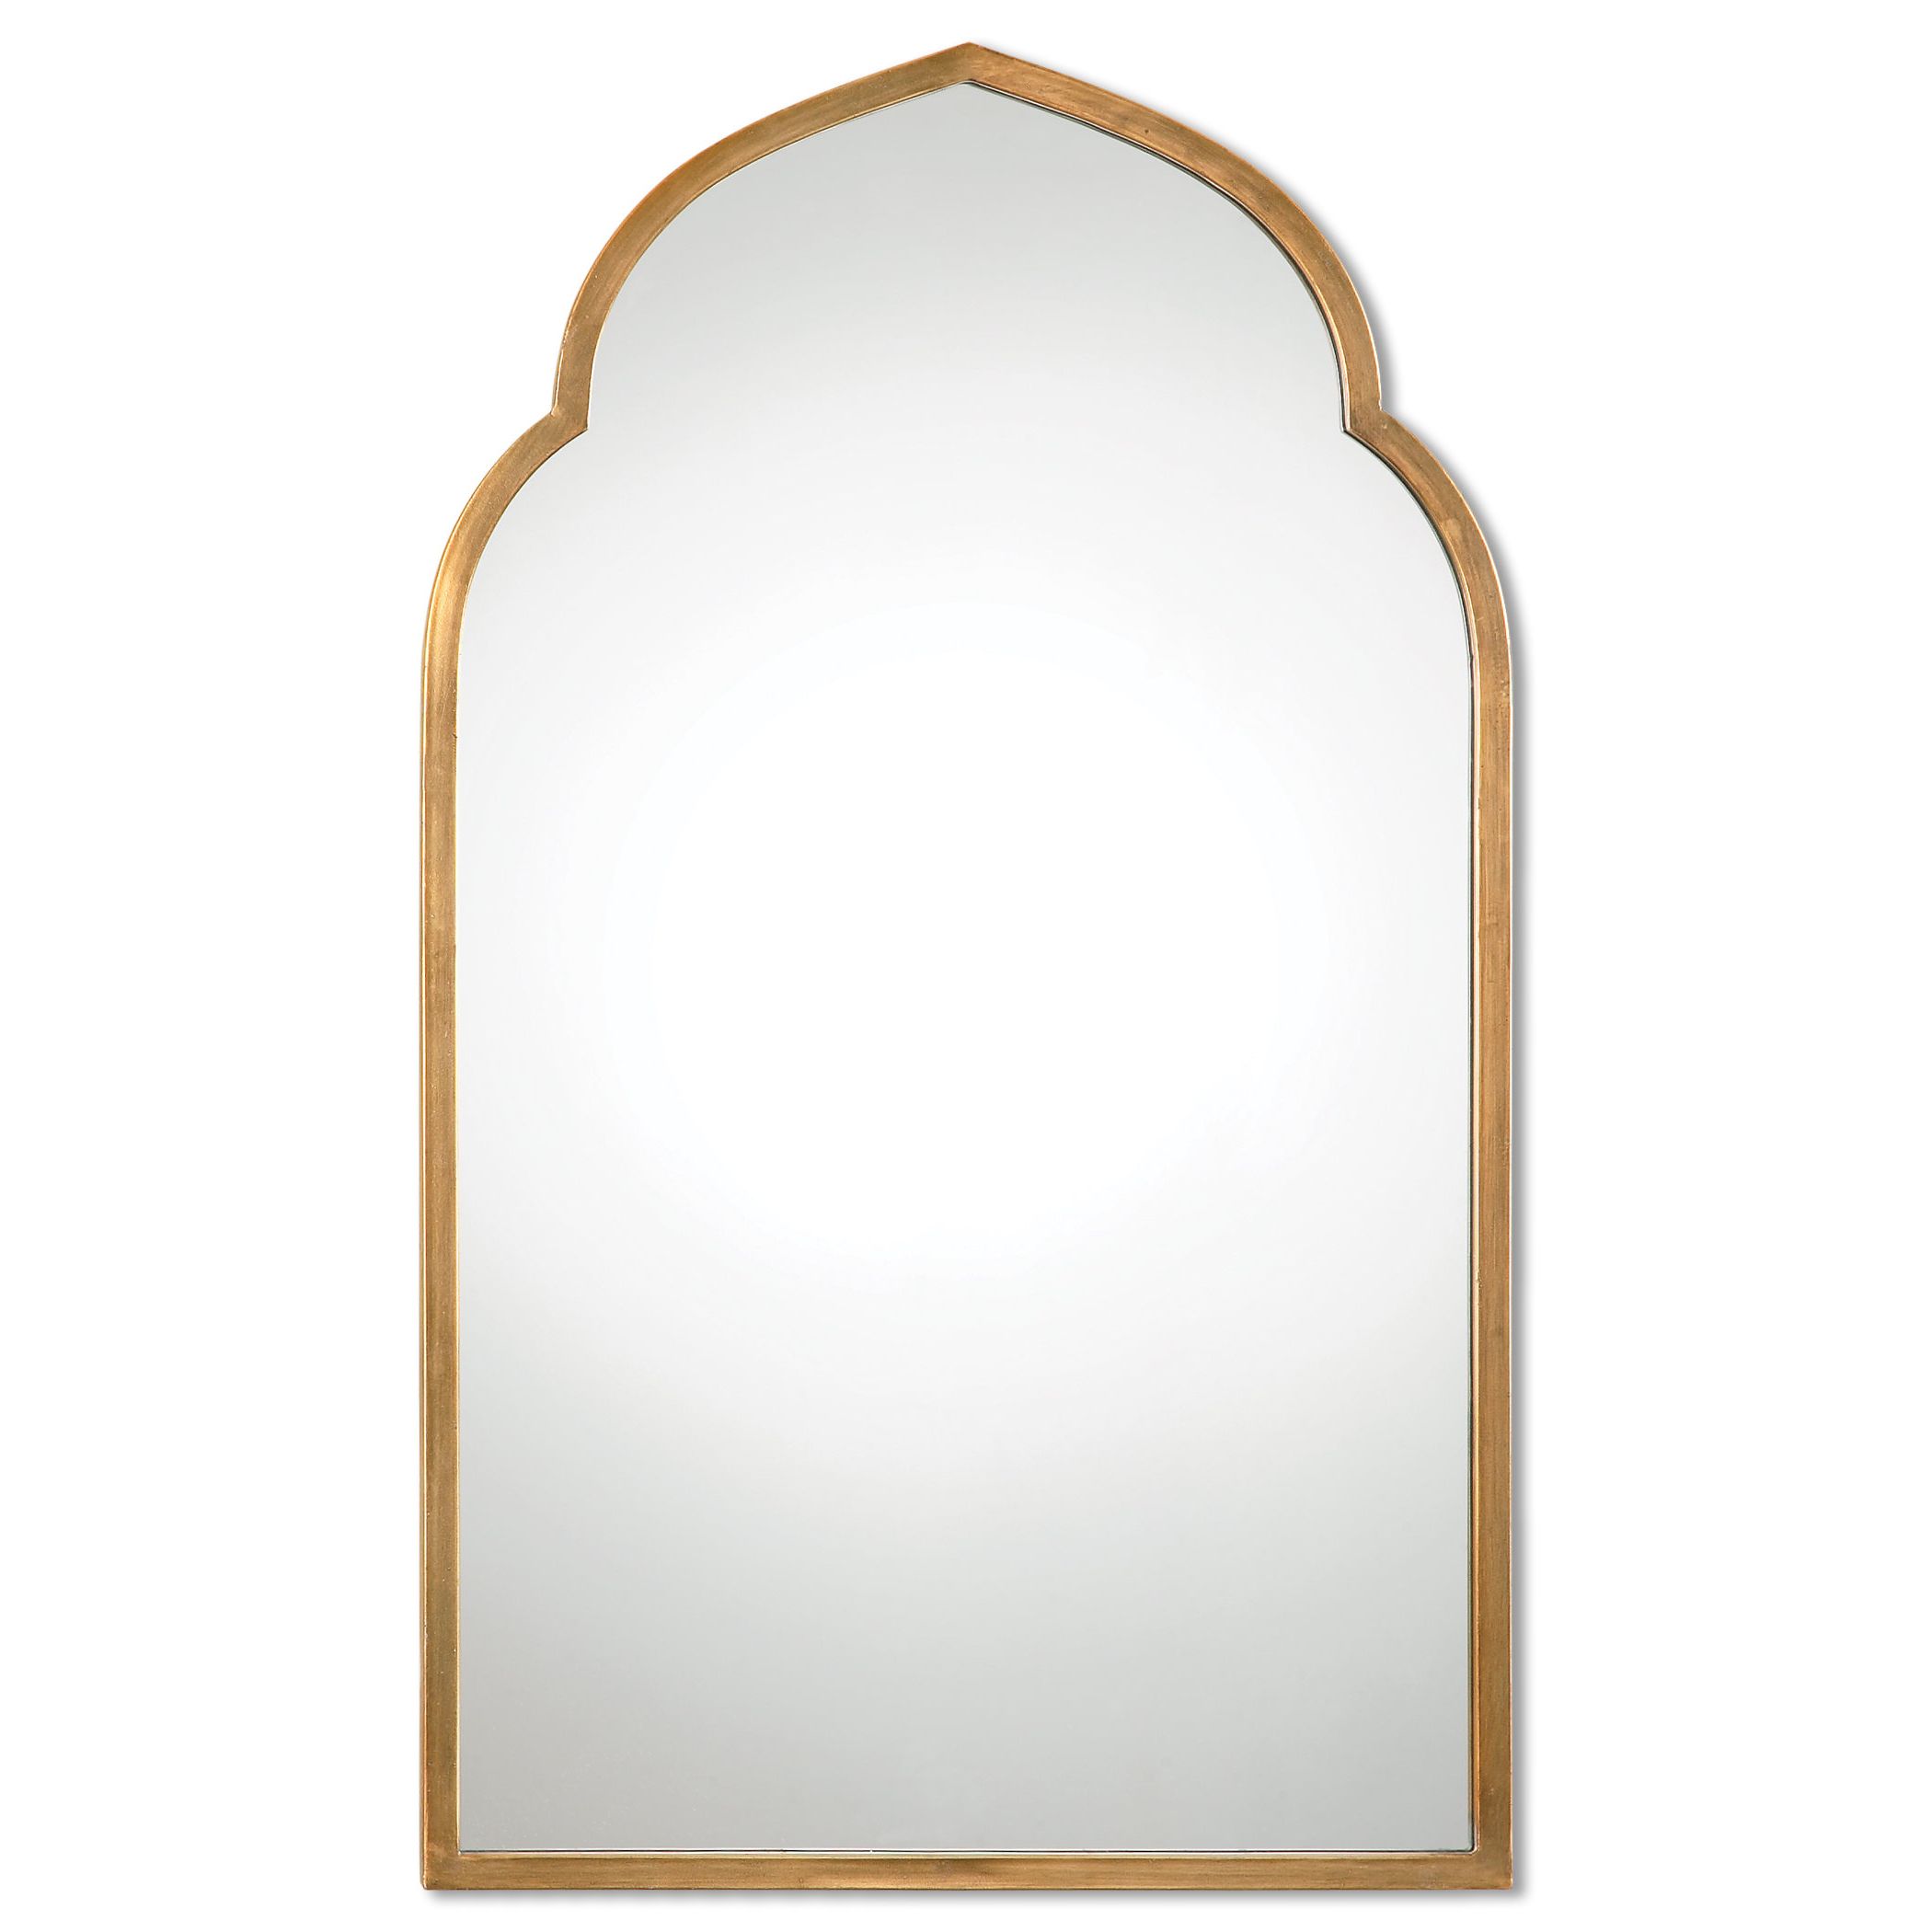 Fifi Contemporary Arch Wall Mirrors Regarding Recent Gold Arch Wall Mirror (View 15 of 20)